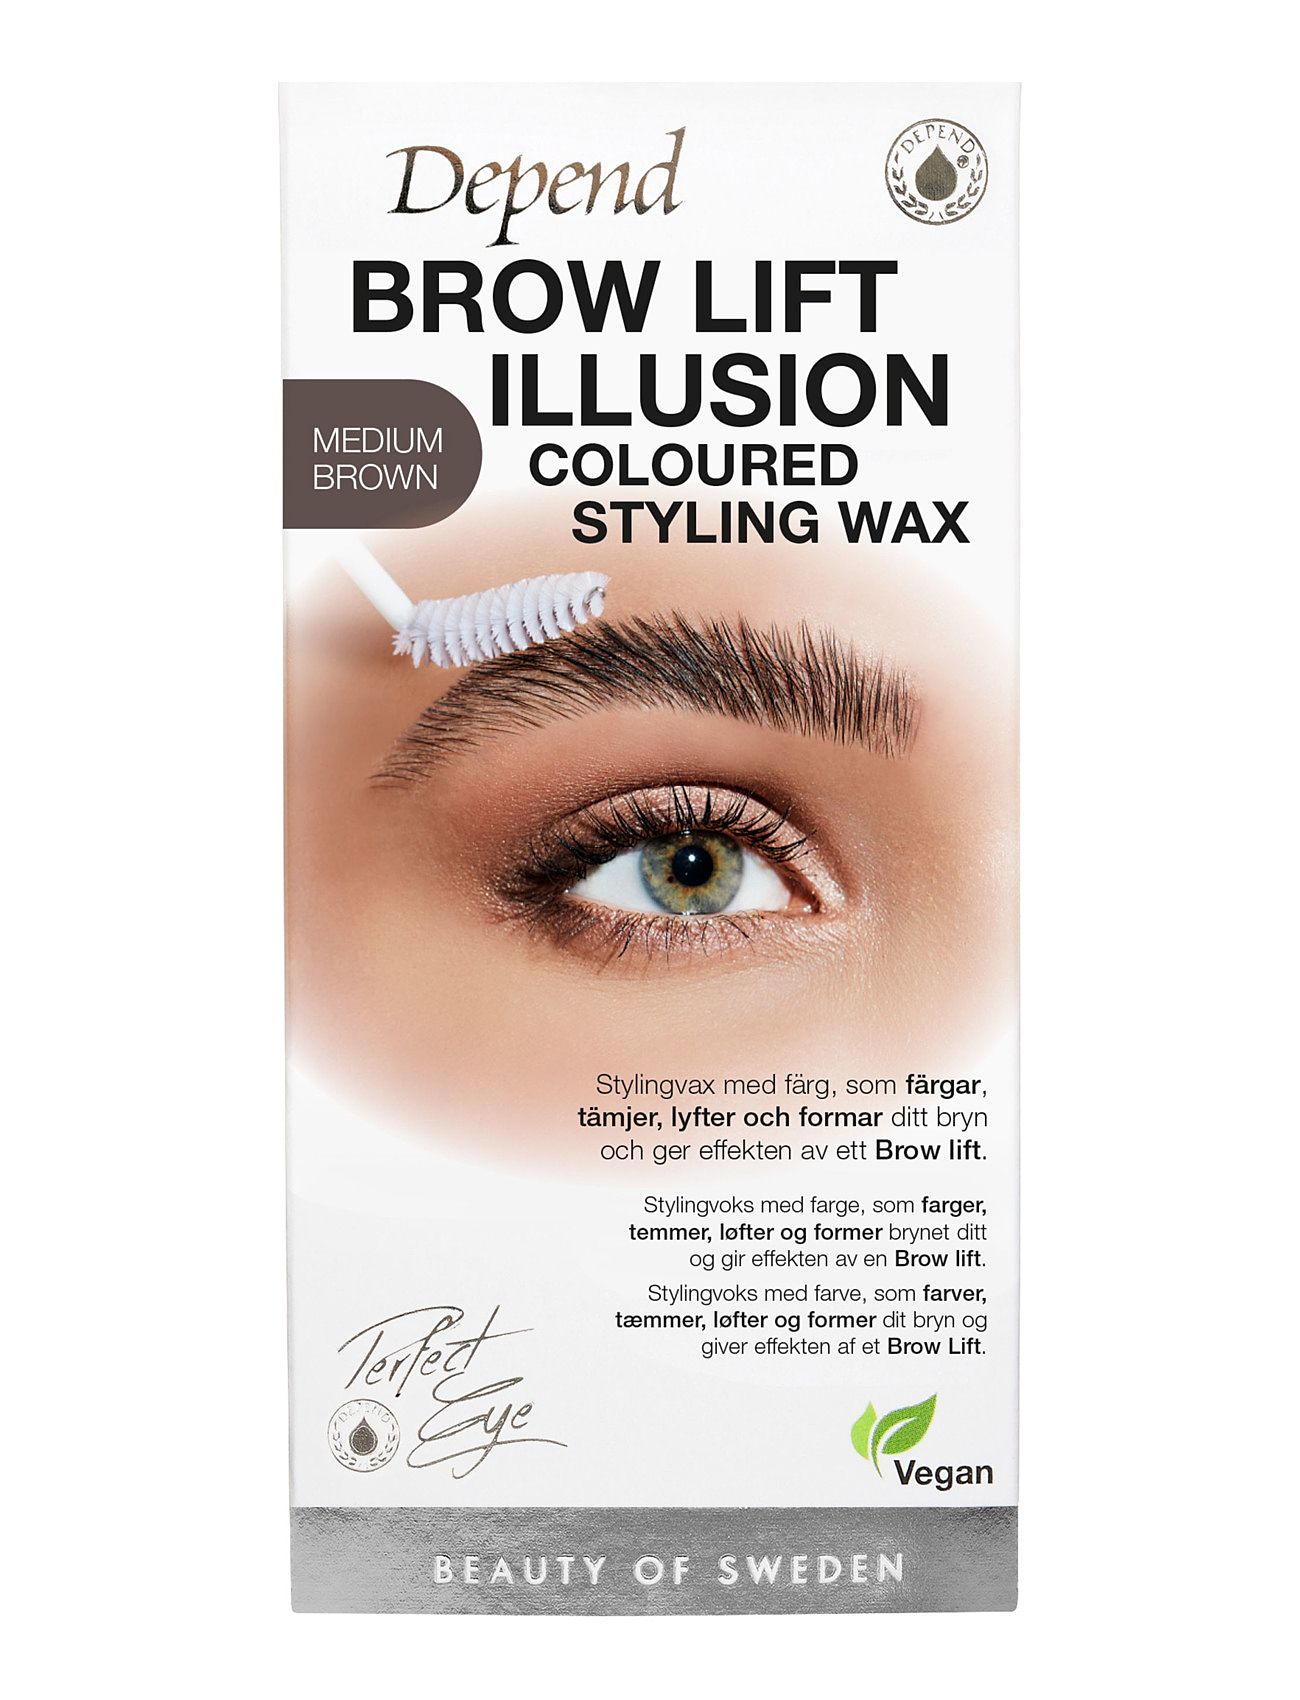 Pe Brow Illusion Wax M.brown Se/No/Dk Beauty Women Makeup Eyes Eyebrows Eyebrow Pomade Nude Depend Cosmetic